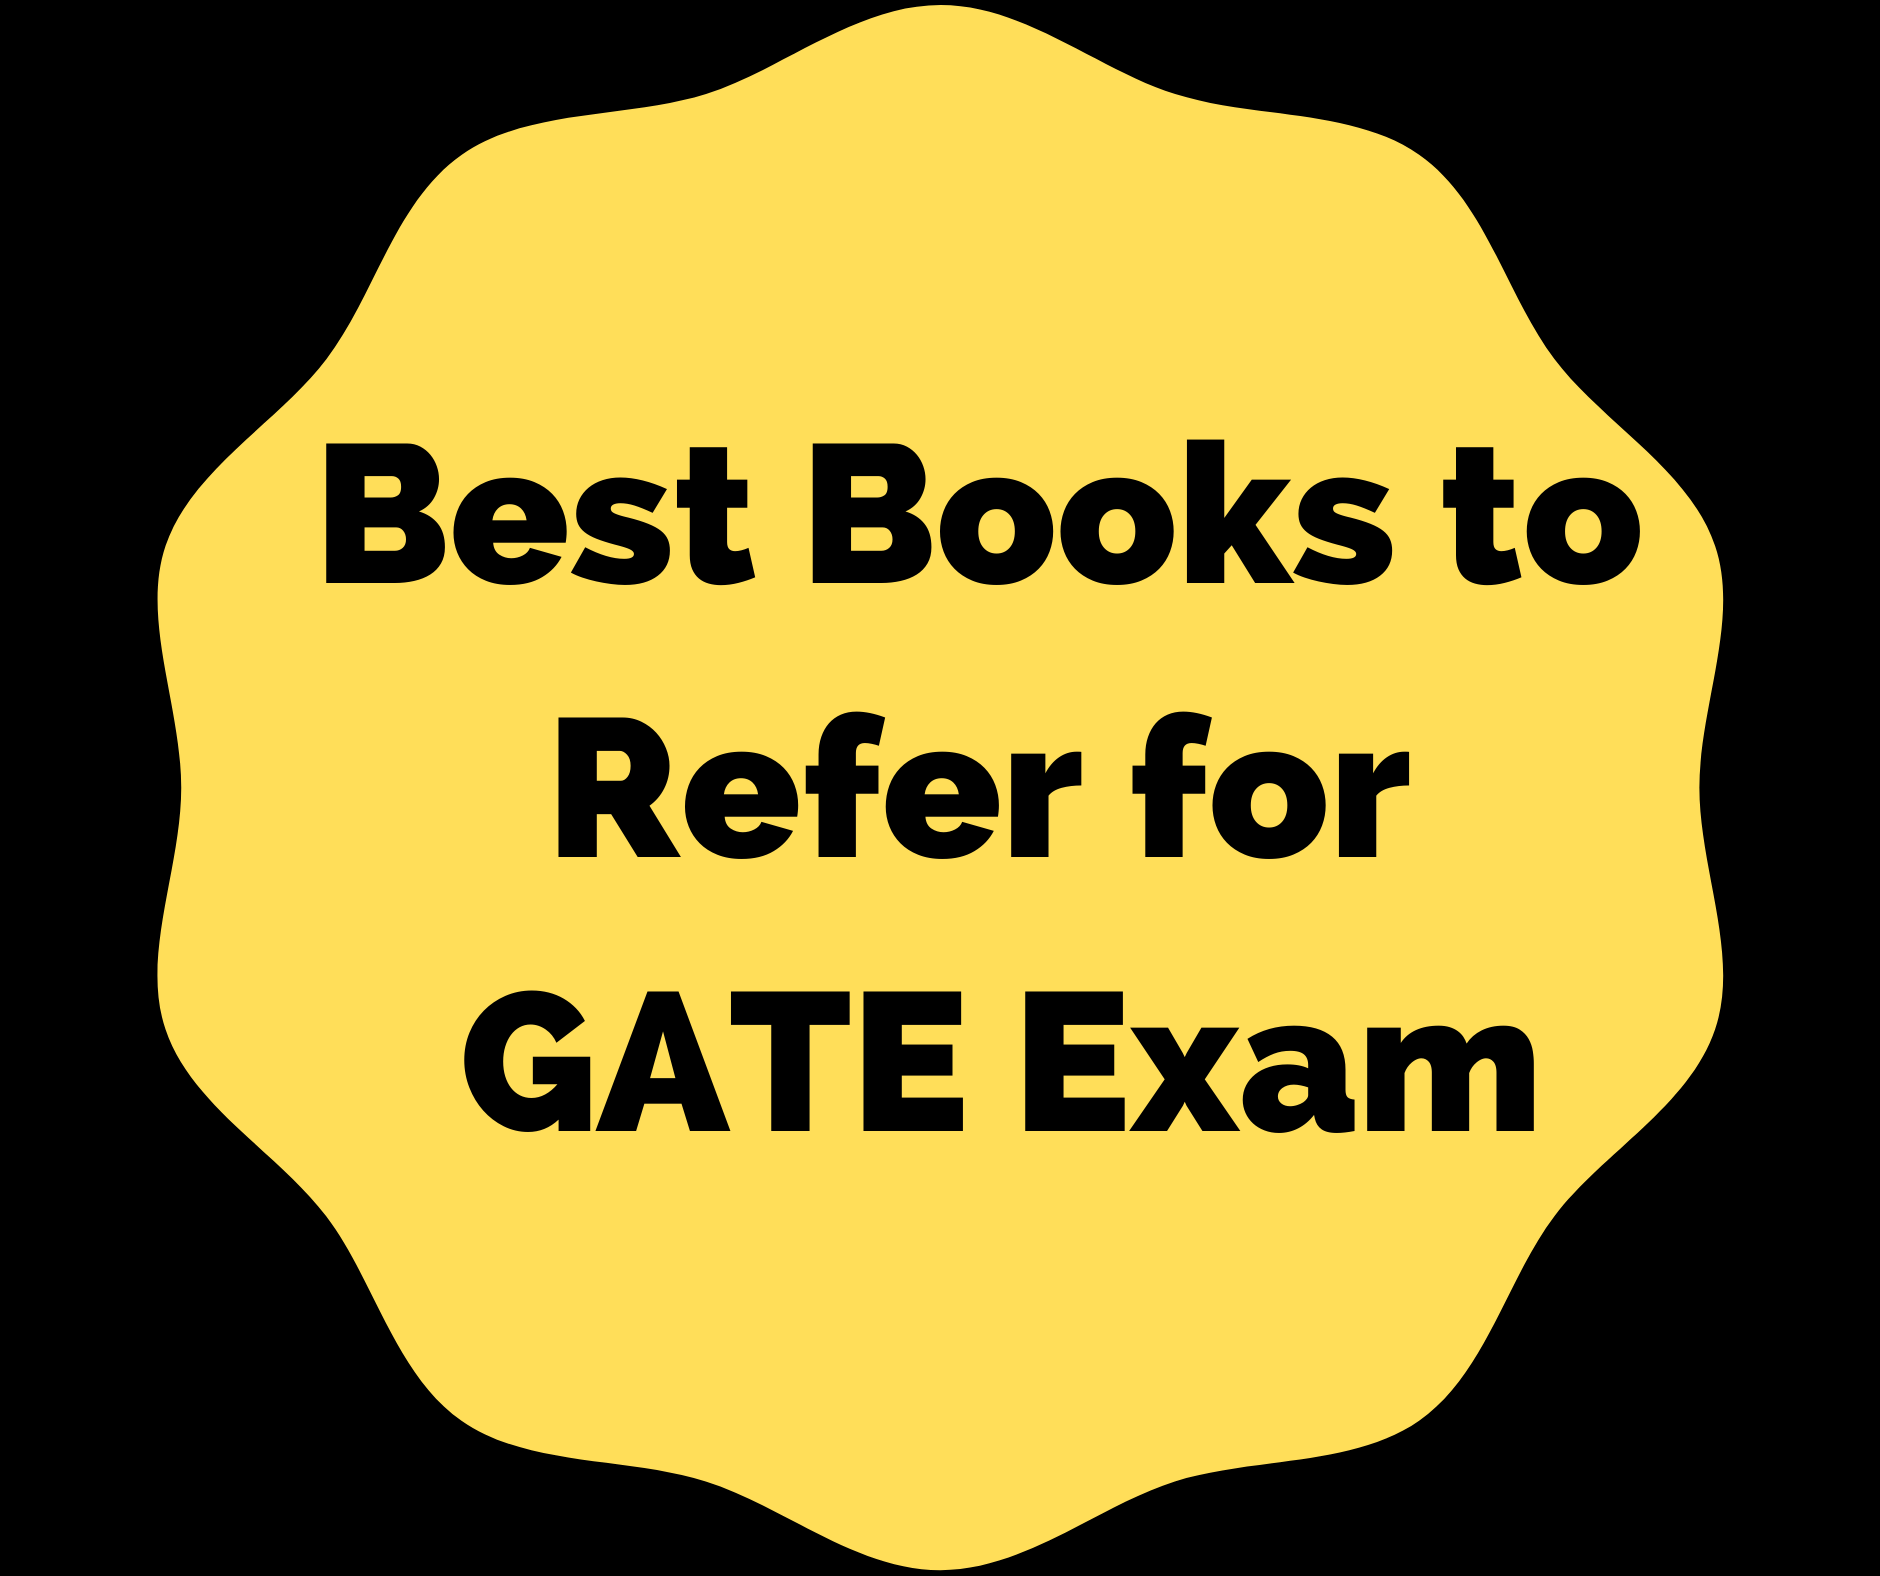 Best Books to Refer for GATE Exam by Gateflix